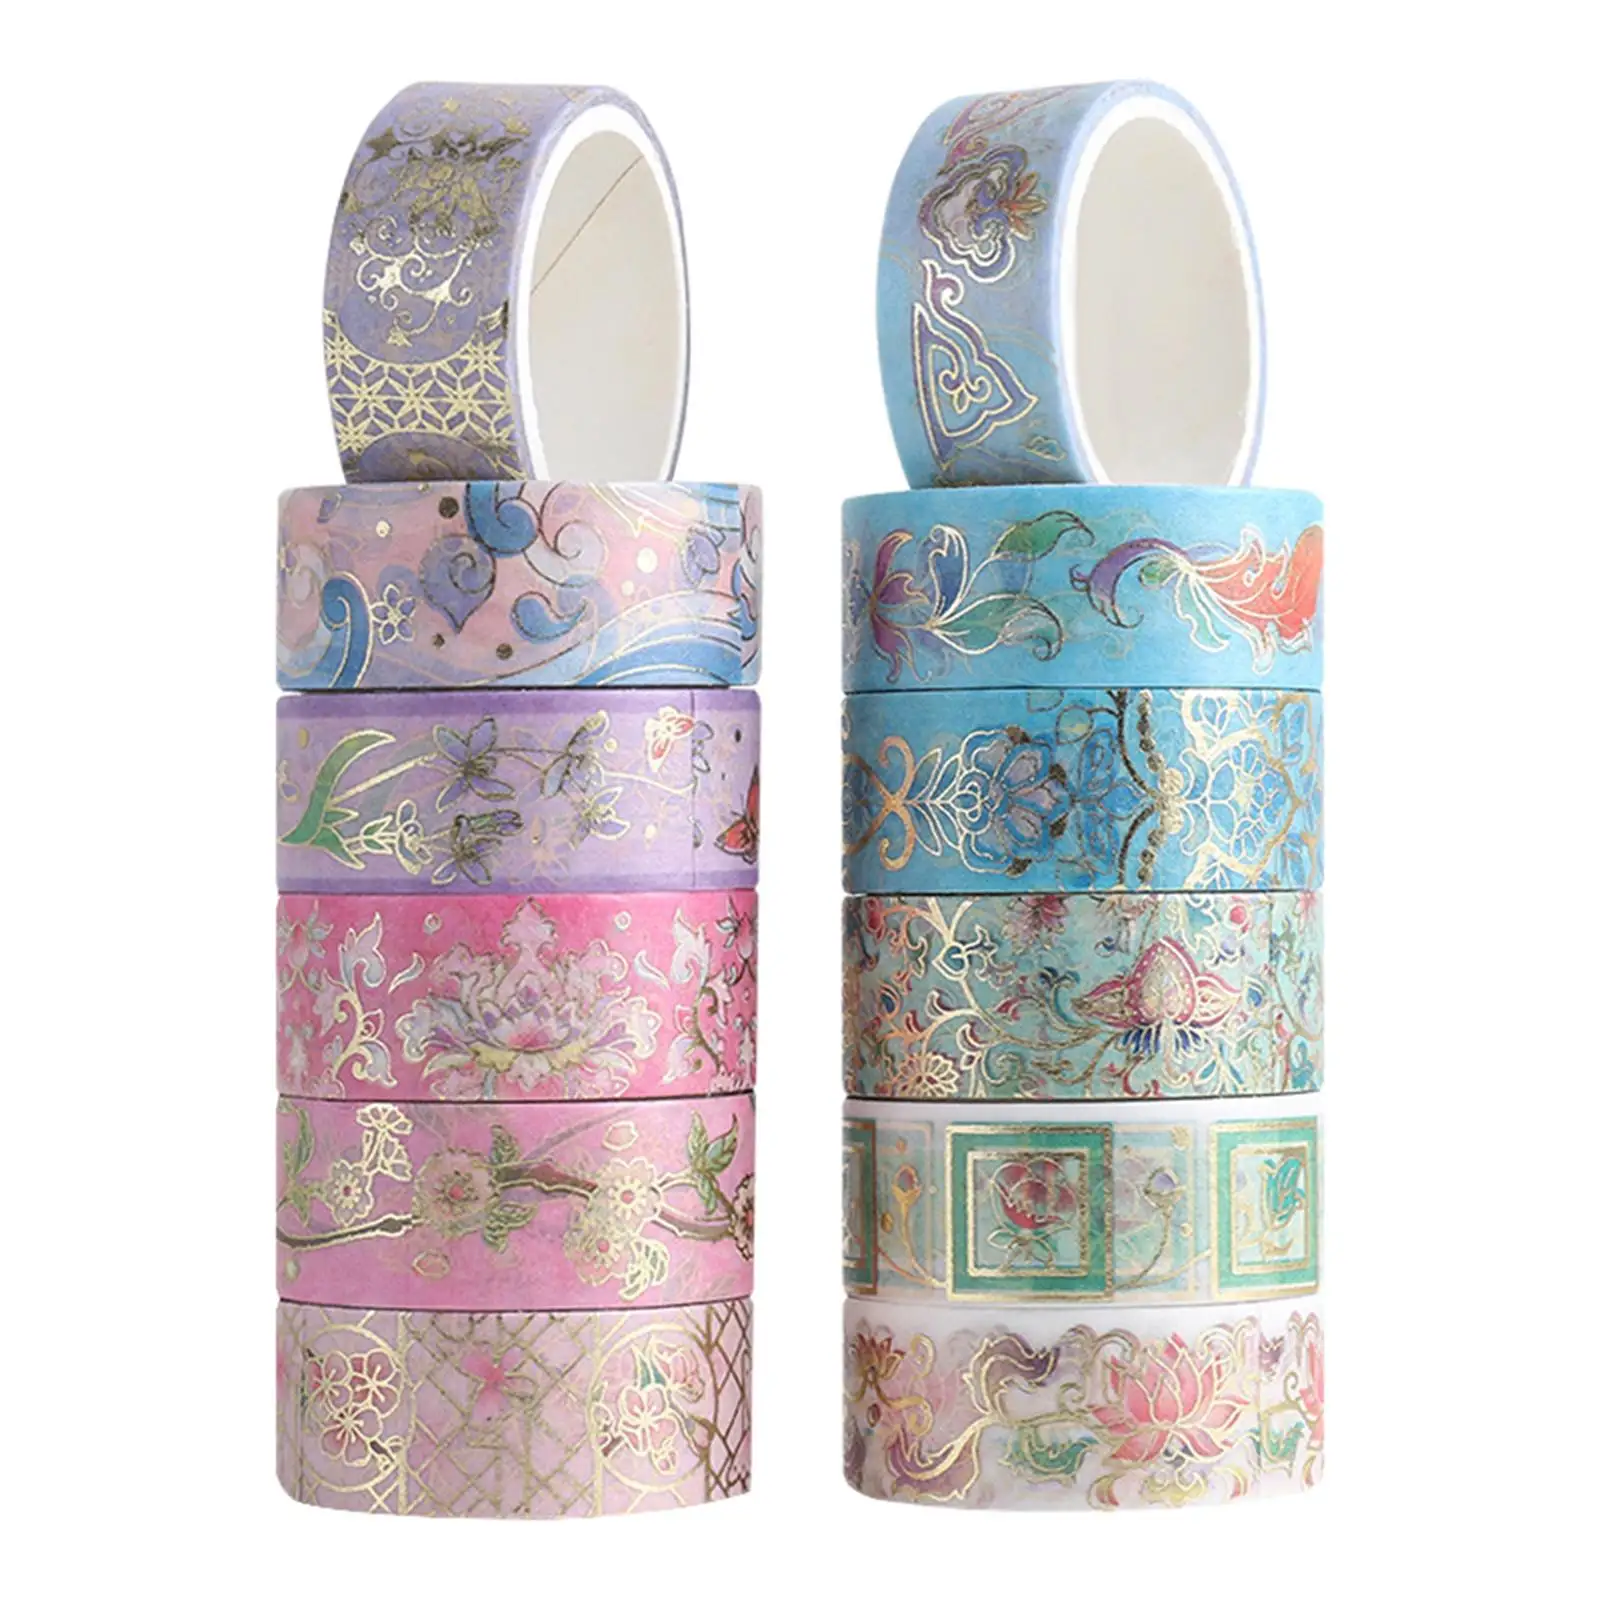 

12 Rolls Decorative Washi Tape DIY Sticker Masking Paper Set For DIY Crafts Planners Scrapbook Journal Card Gift Wrapping